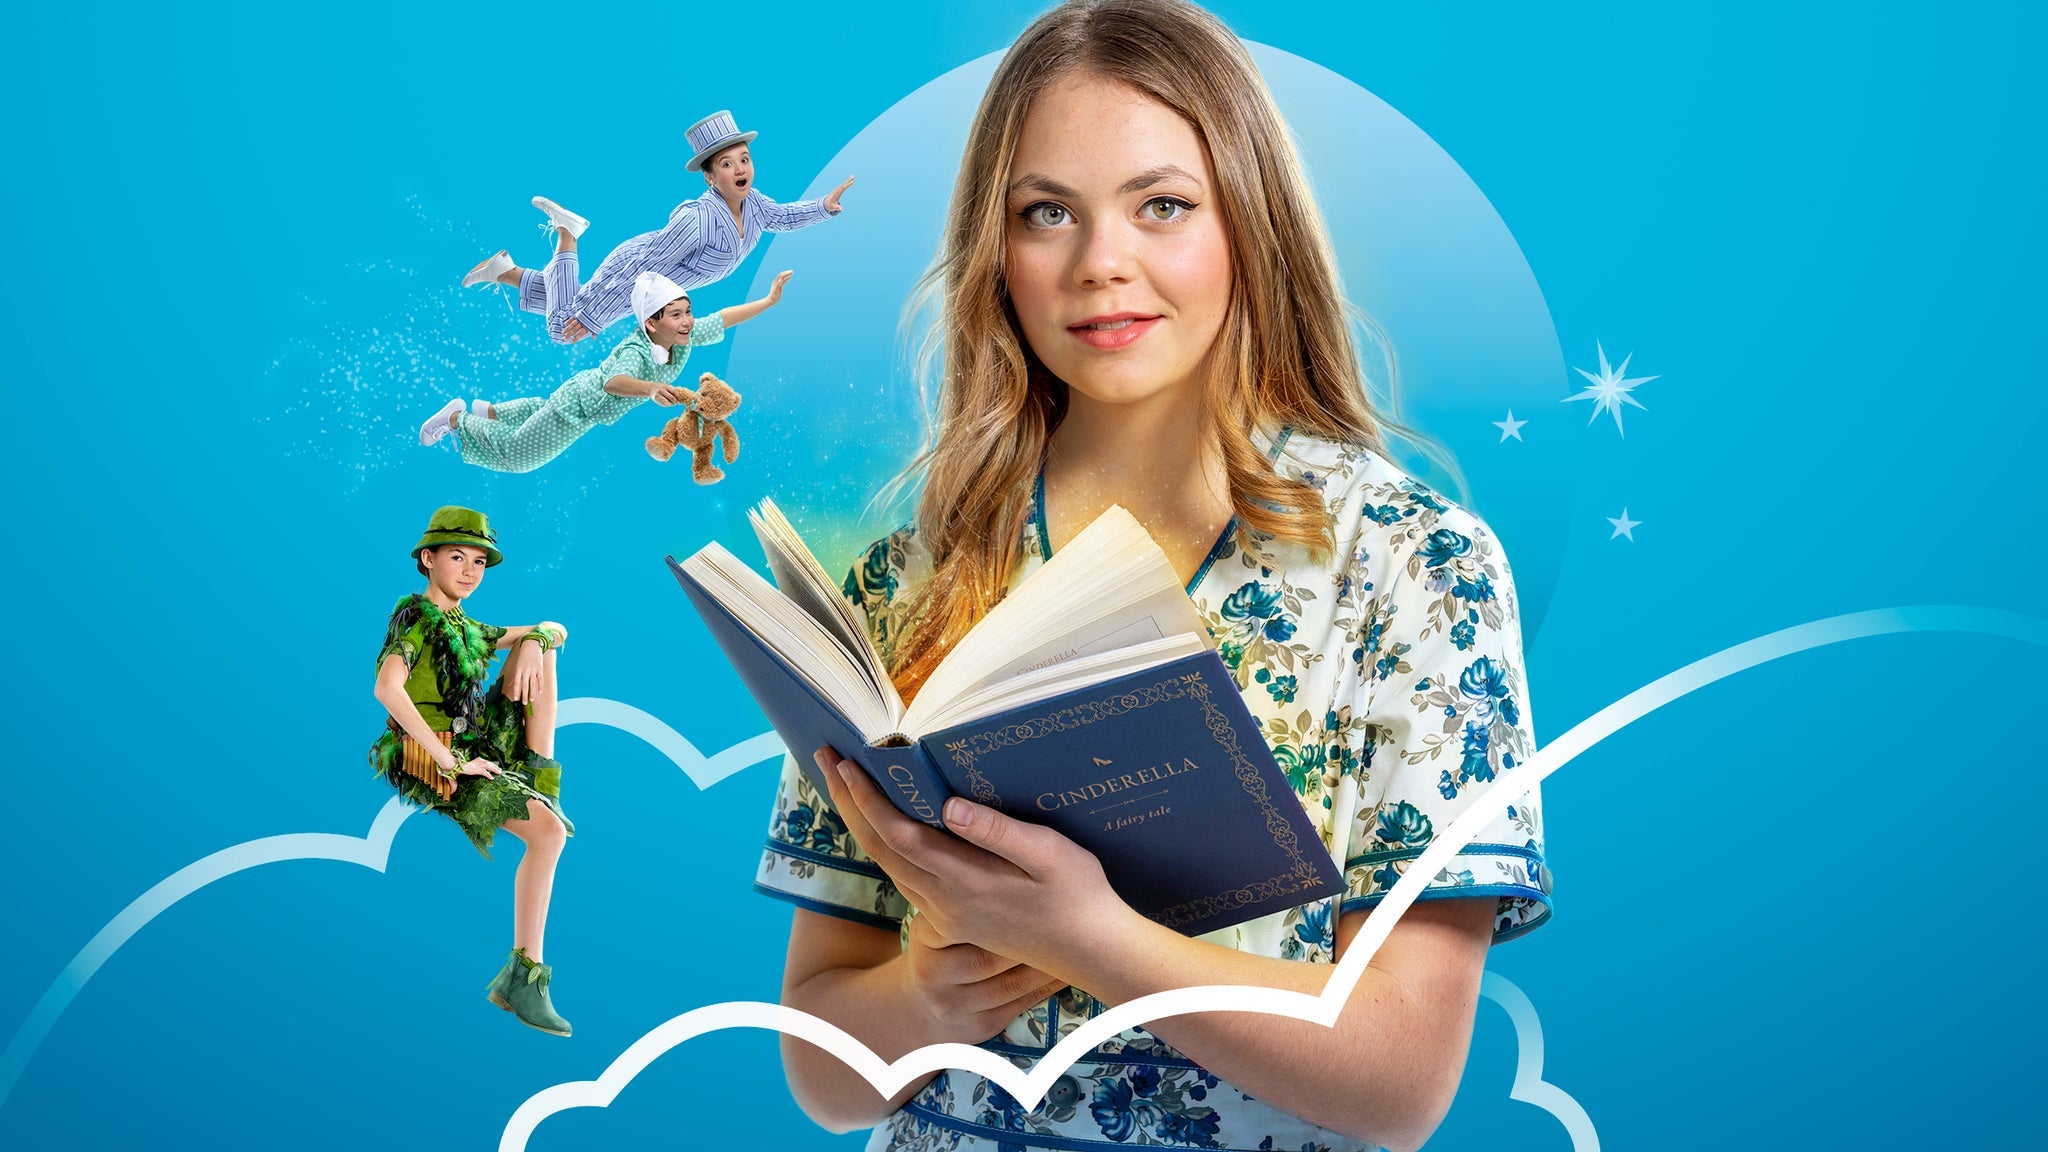 Image used with permission from Ticketmaster | National Youth Theatre presents Wendy, the Peter Pan Musical tickets